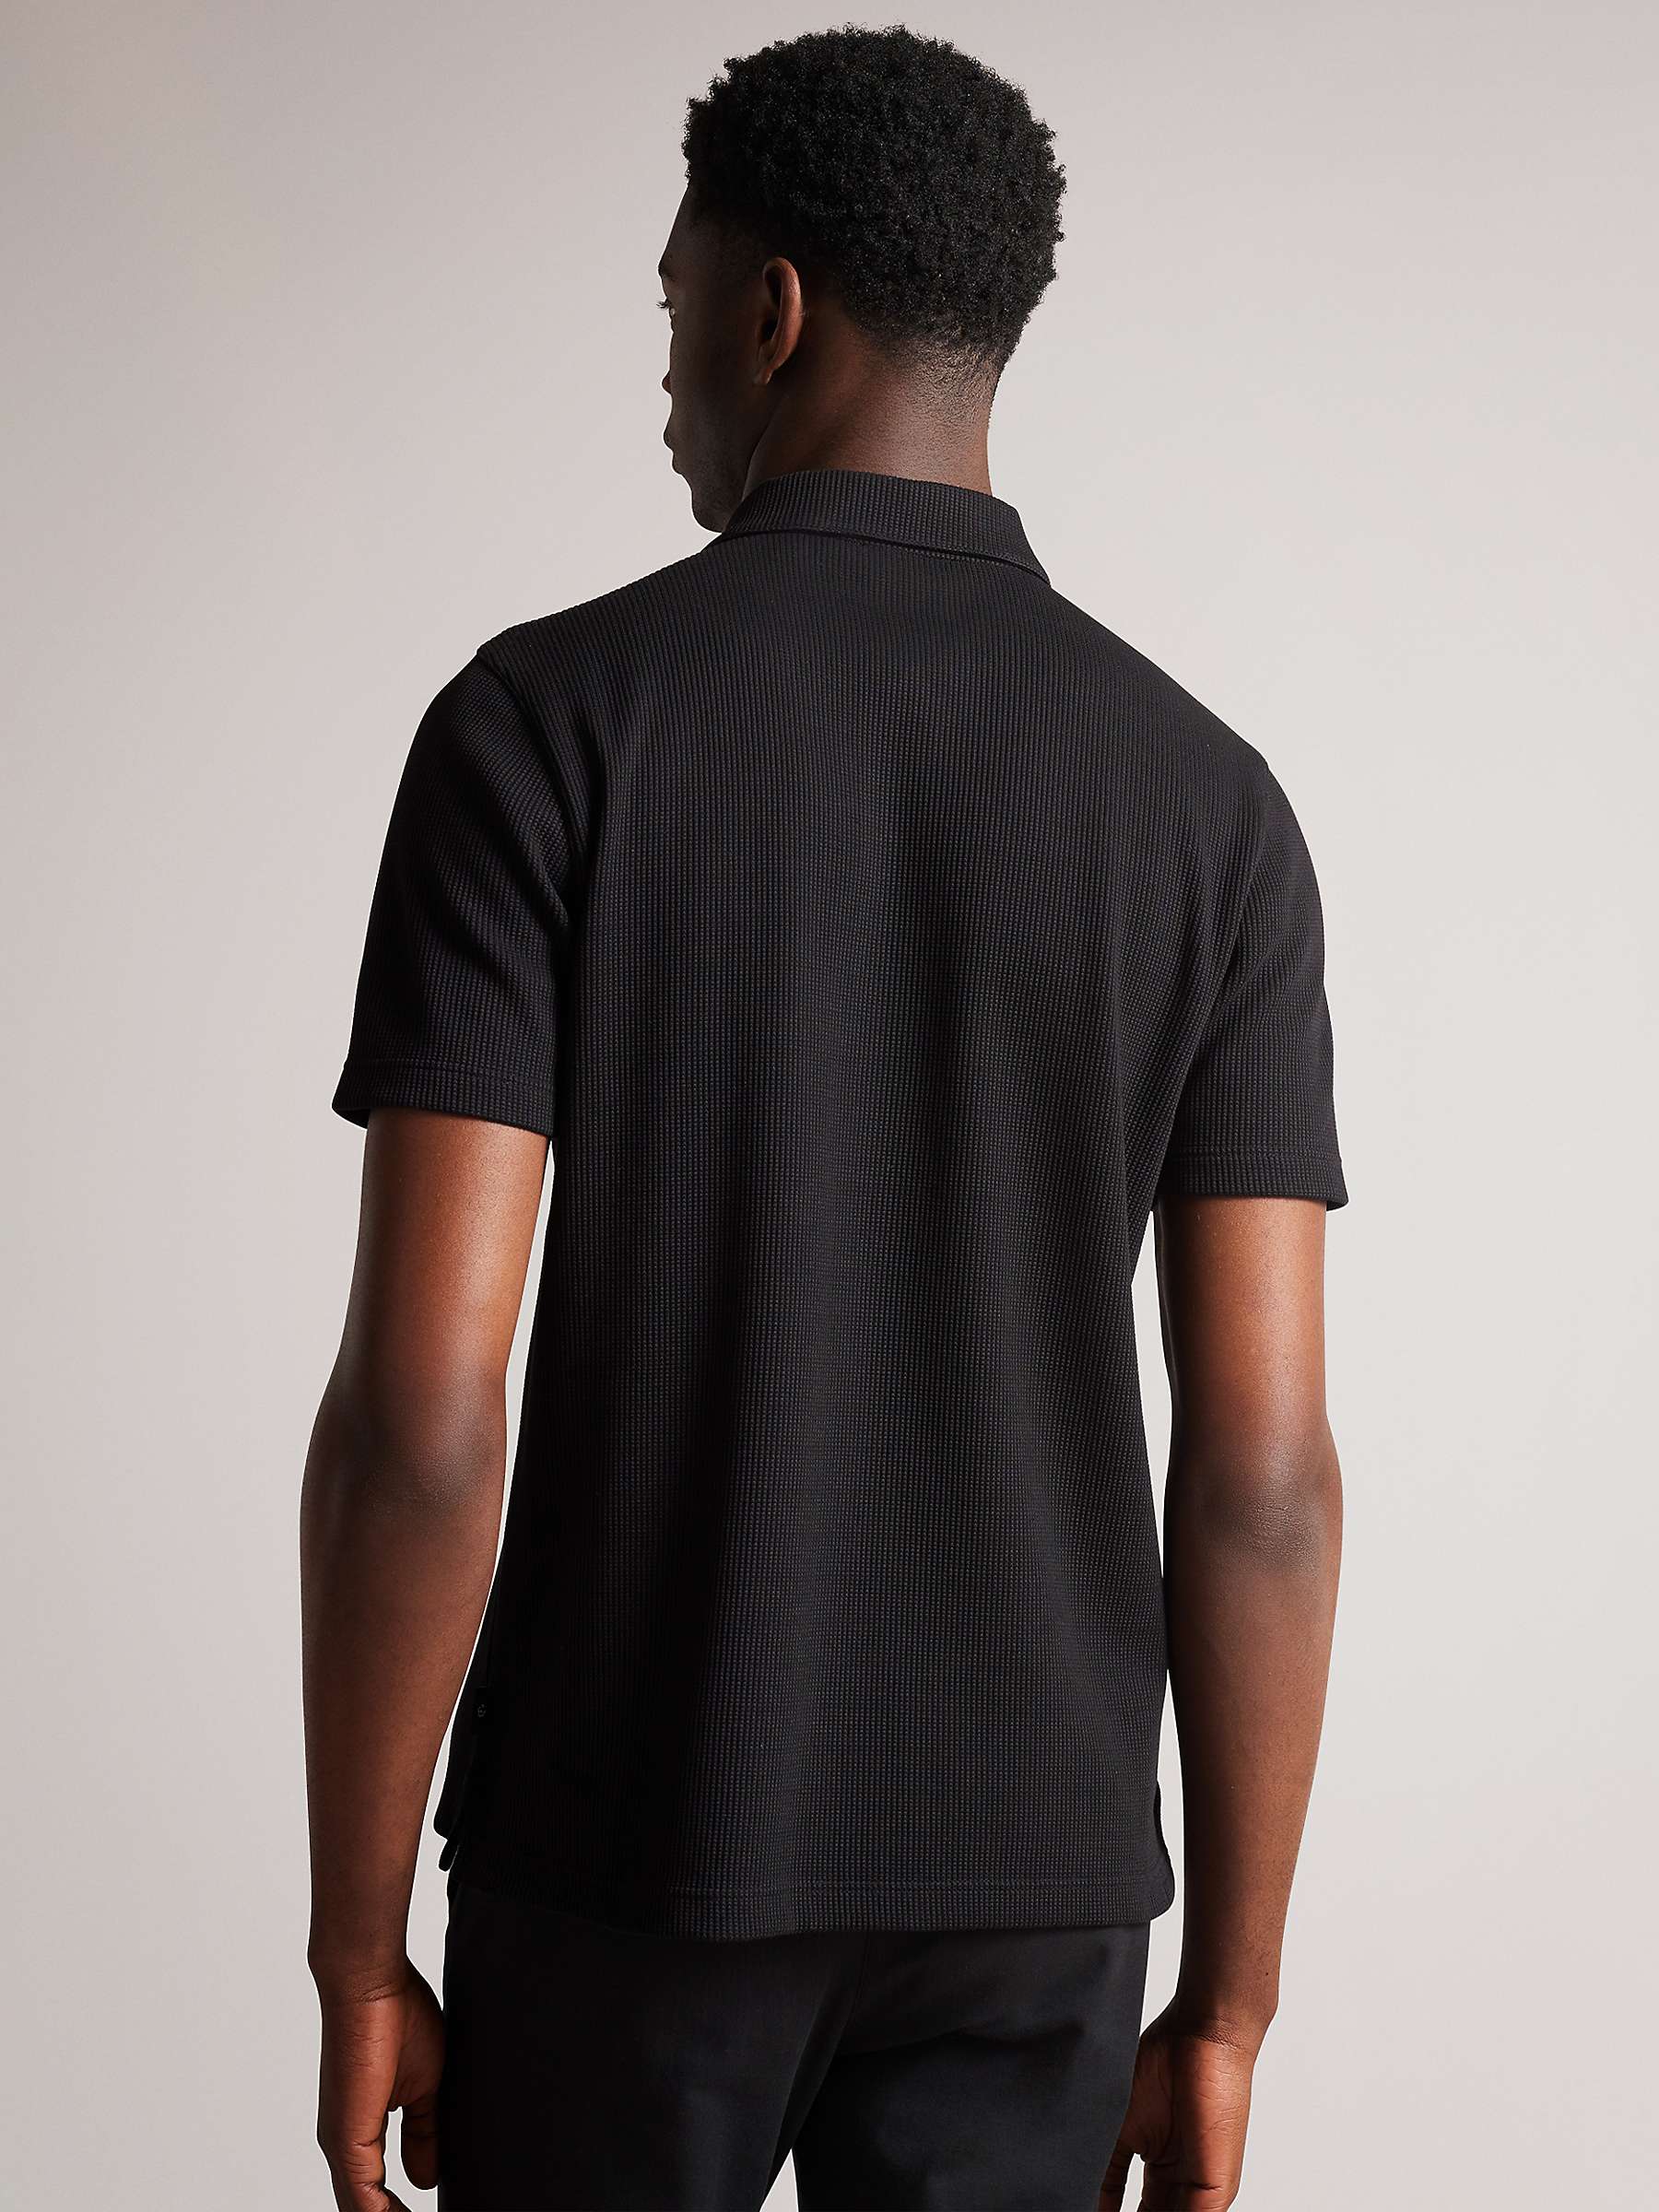 Ted Baker Bute Textured Fit Polo Shirt, Black at John Lewis & Partners